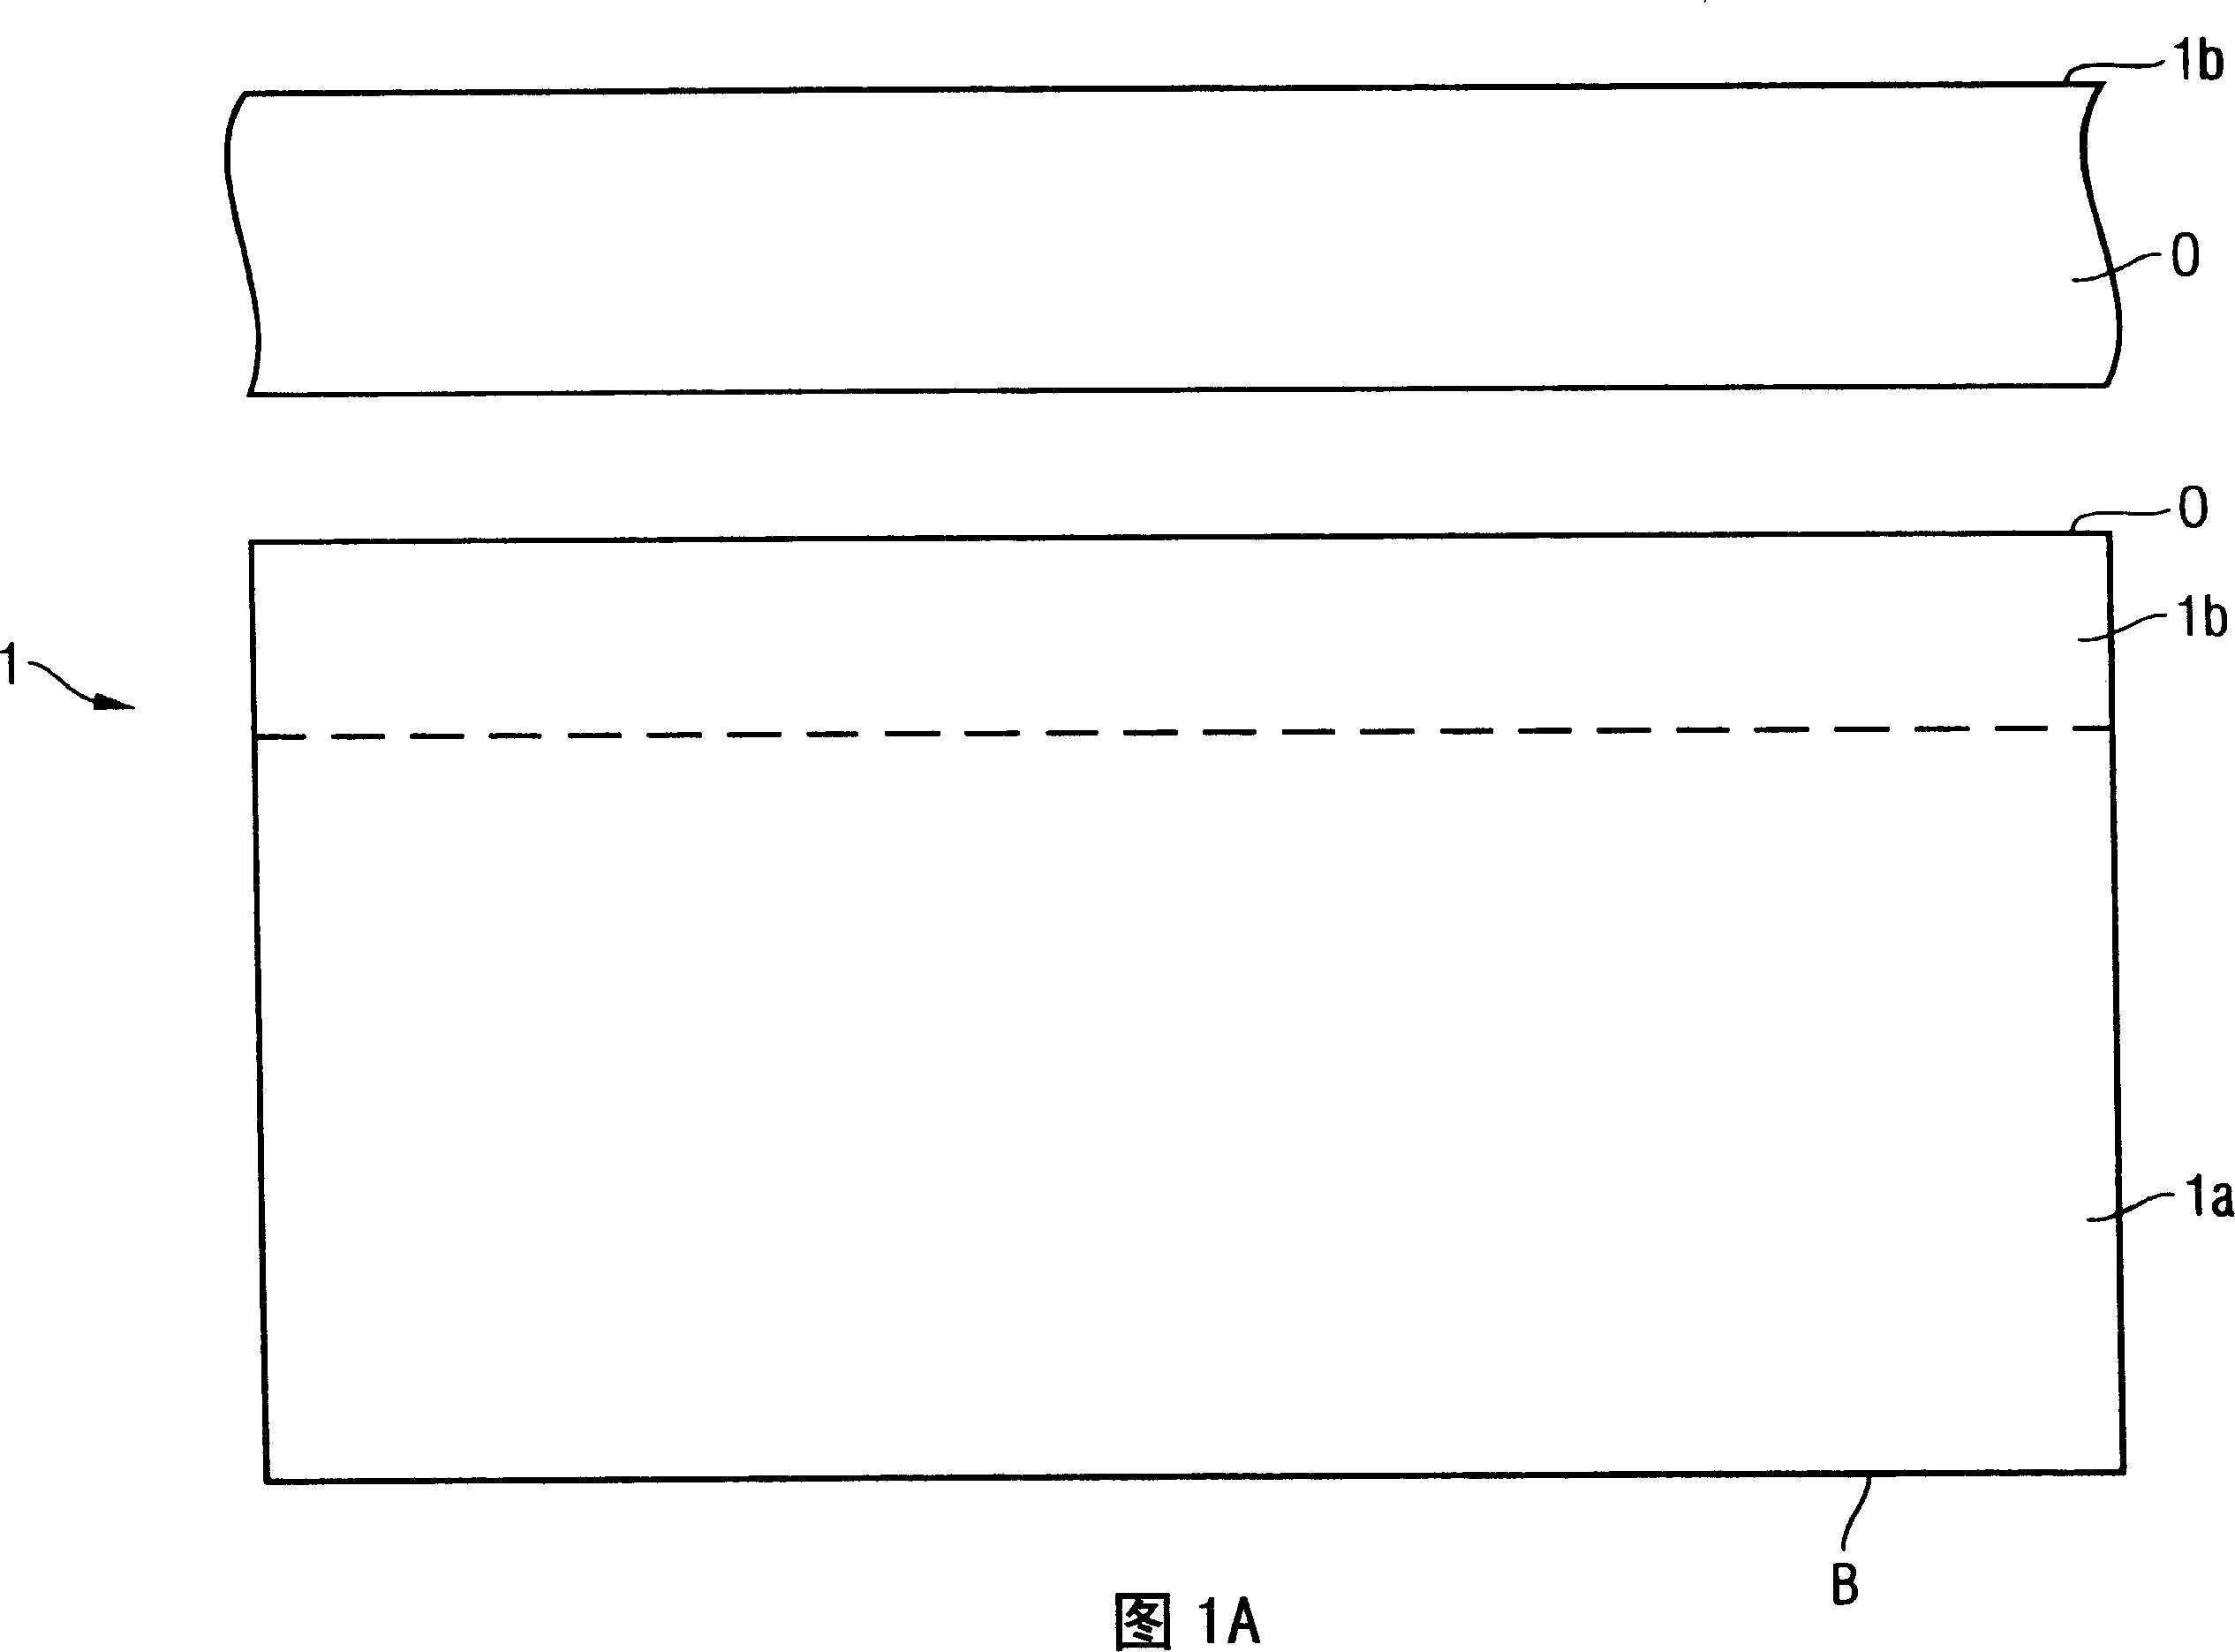 Method of manufacturing a semiconductor structure and a corresponding semiconductor structure